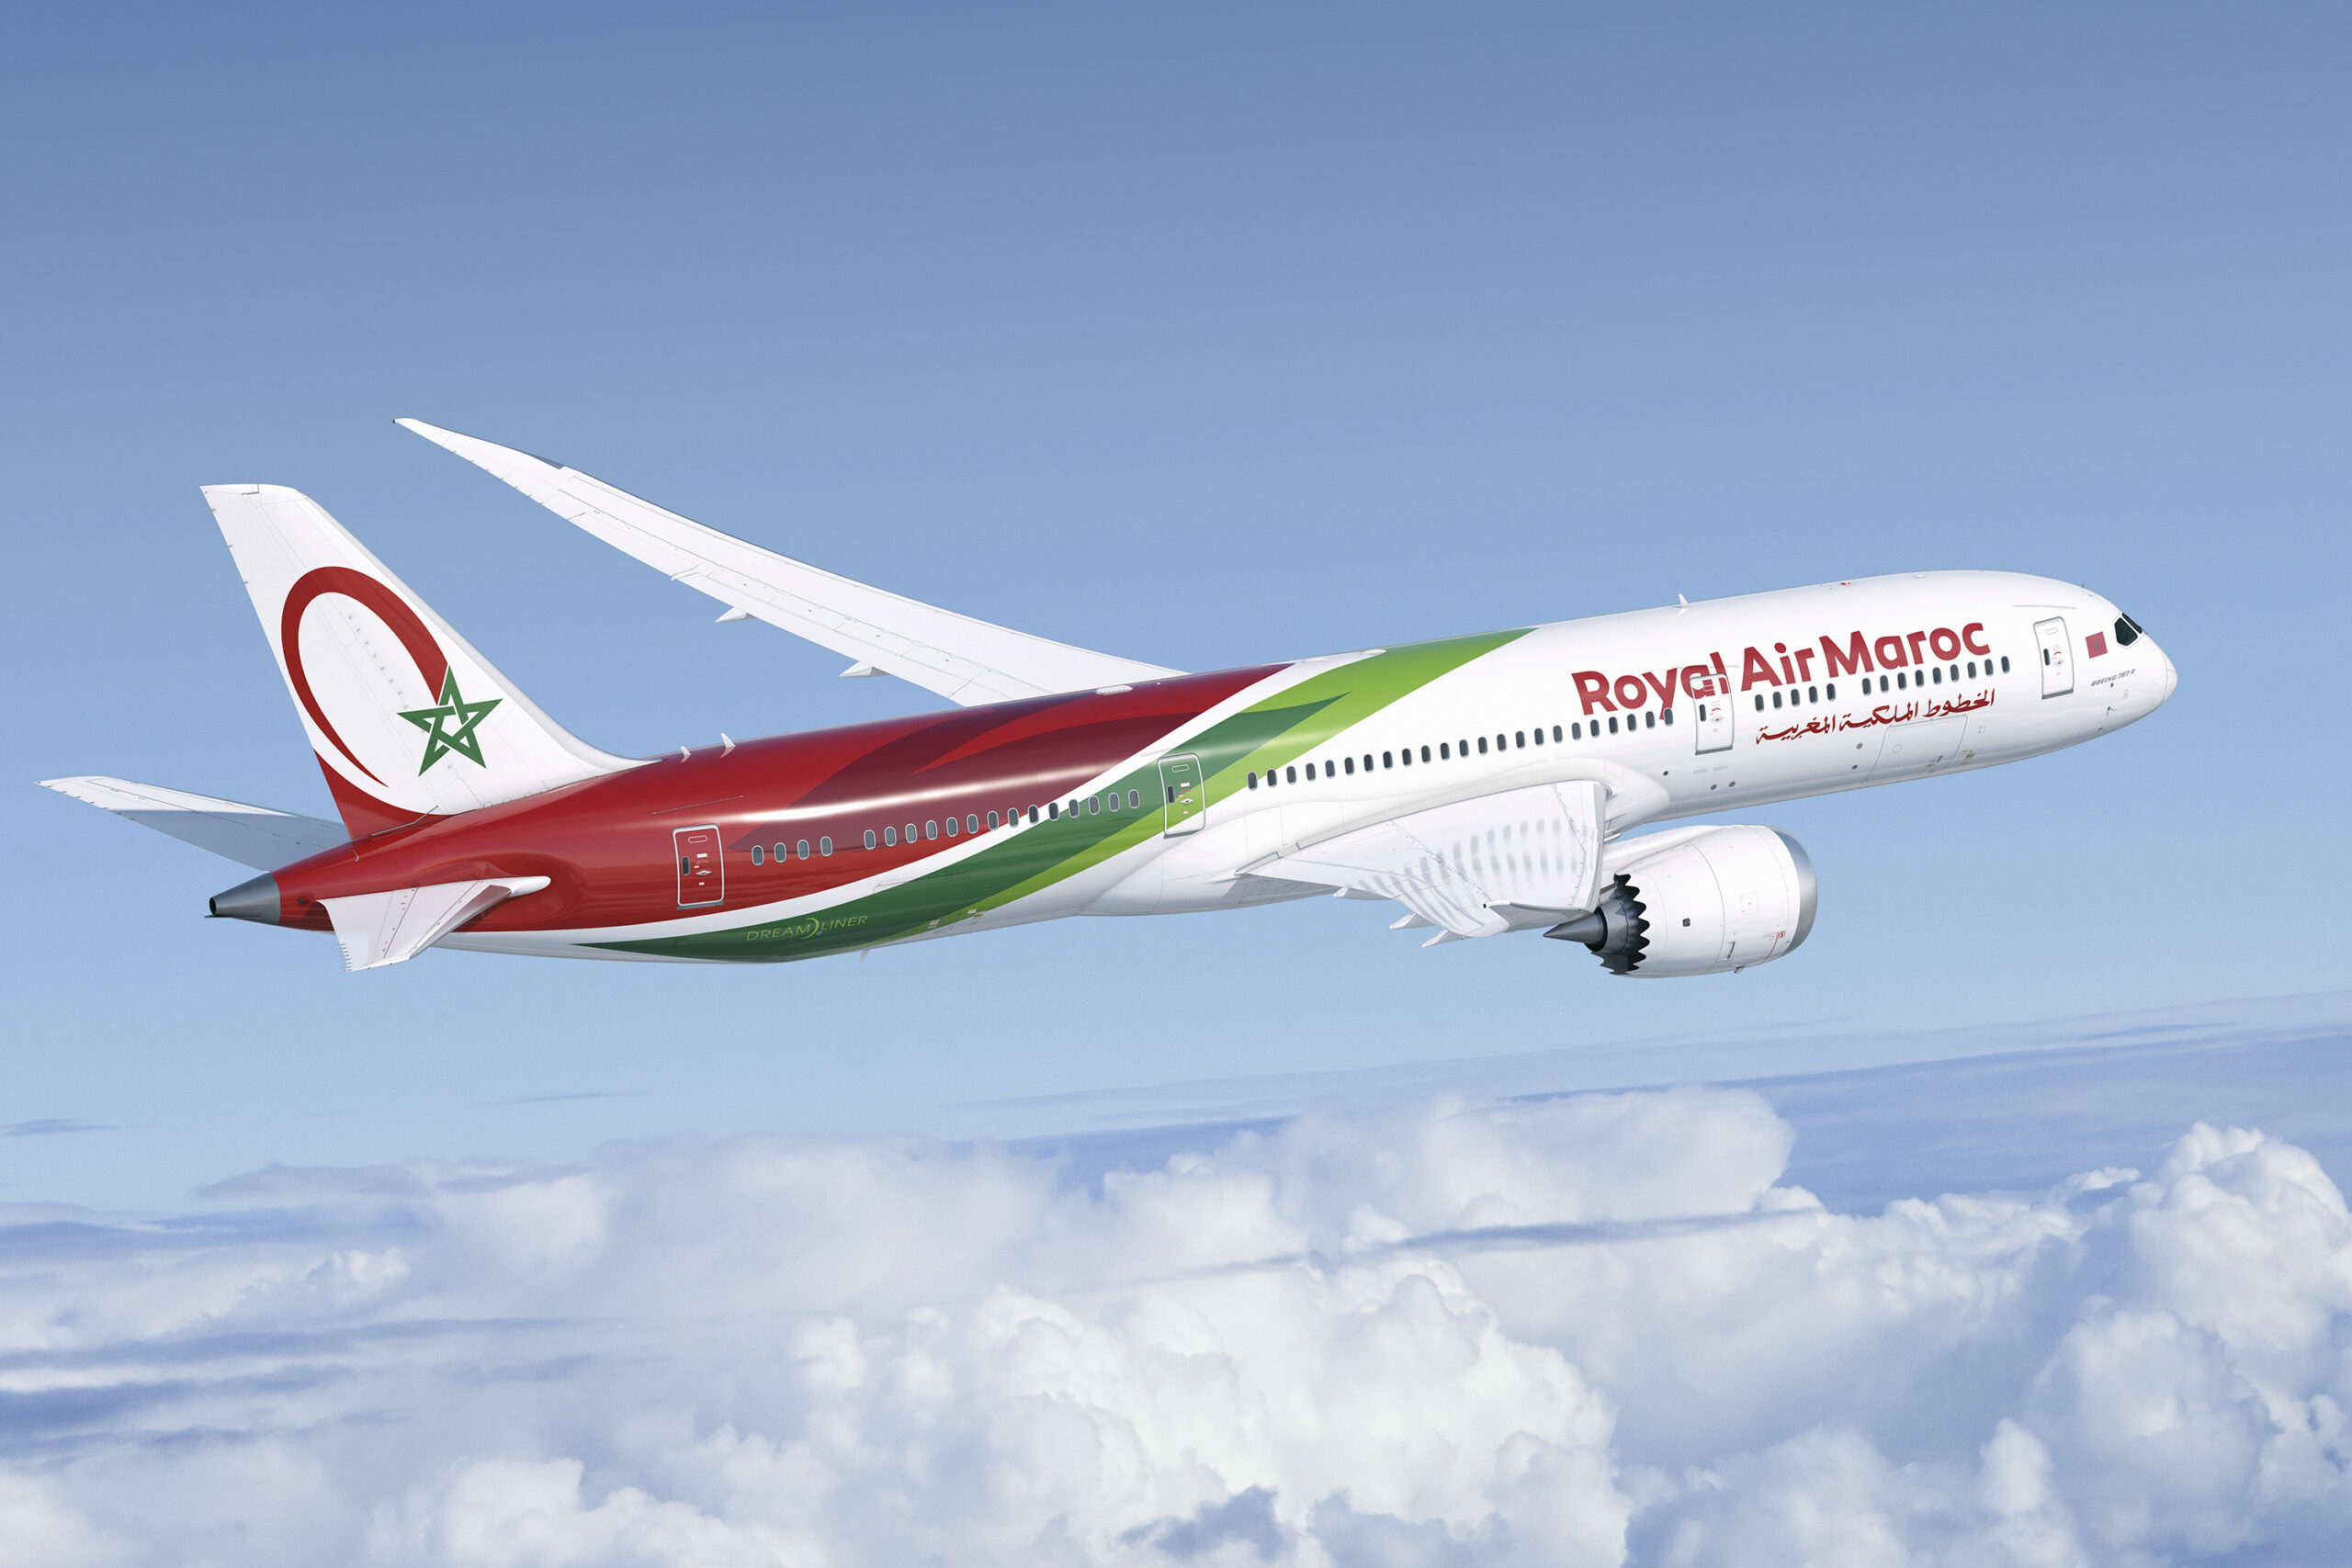 Moroccan carrier to launch new direct routes to Manchester, Naples, Abuja by June